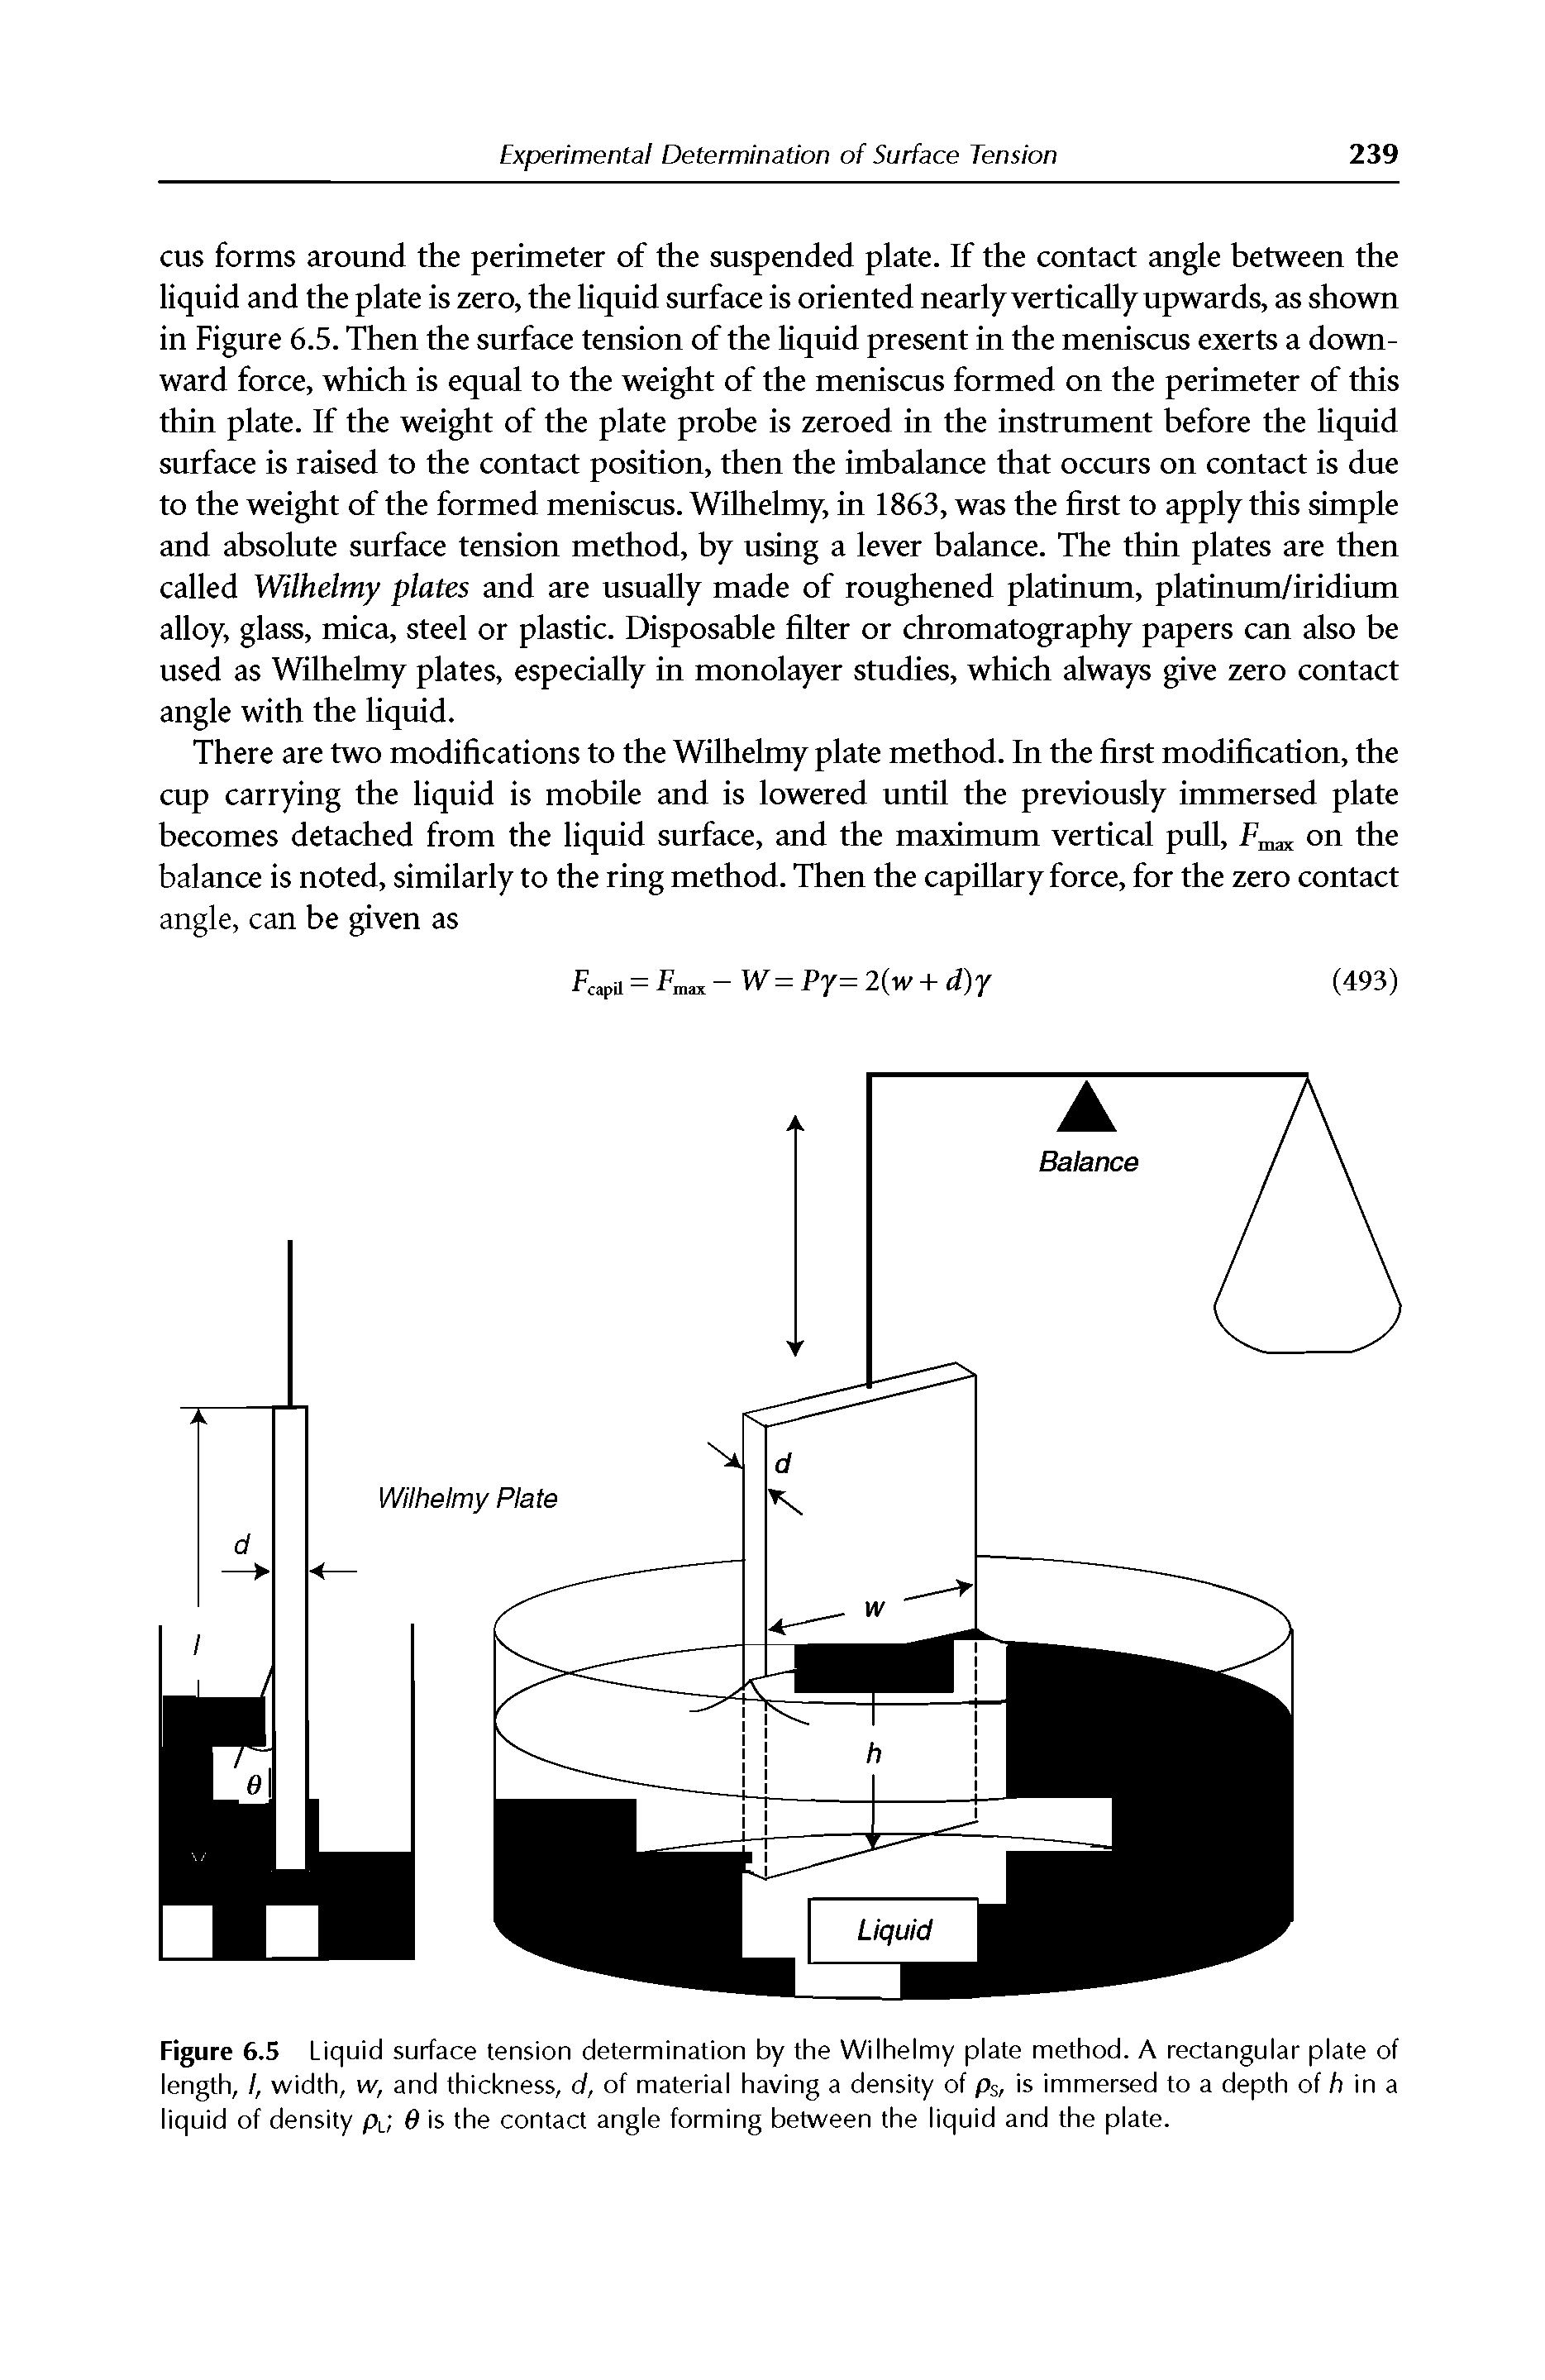 Figure 6.5 Liquid surface tension determination by the Wilhelmy plate method. A rectangular plate of length, /, width, w, and thickness, d, of material having a density of ps, is immersed to a depth of h in a liquid of density pL 6 is the contact angle forming between the liquid and the plate.